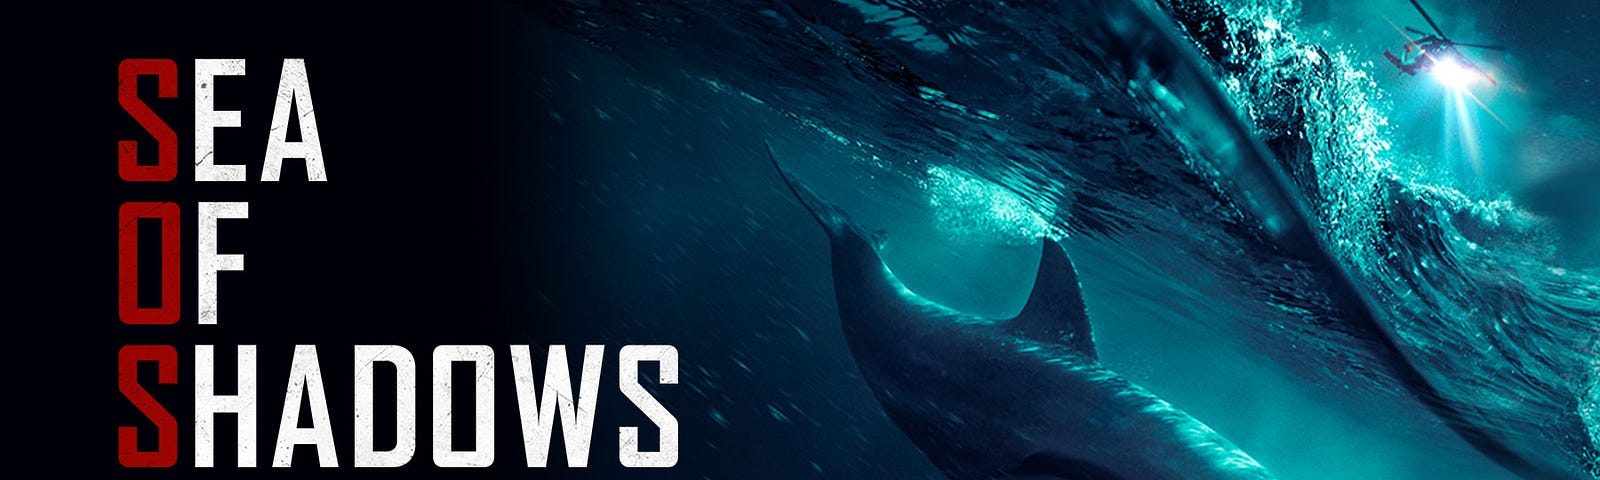 Vaquita porpoise under water on cover of Sea of Shadows film poster